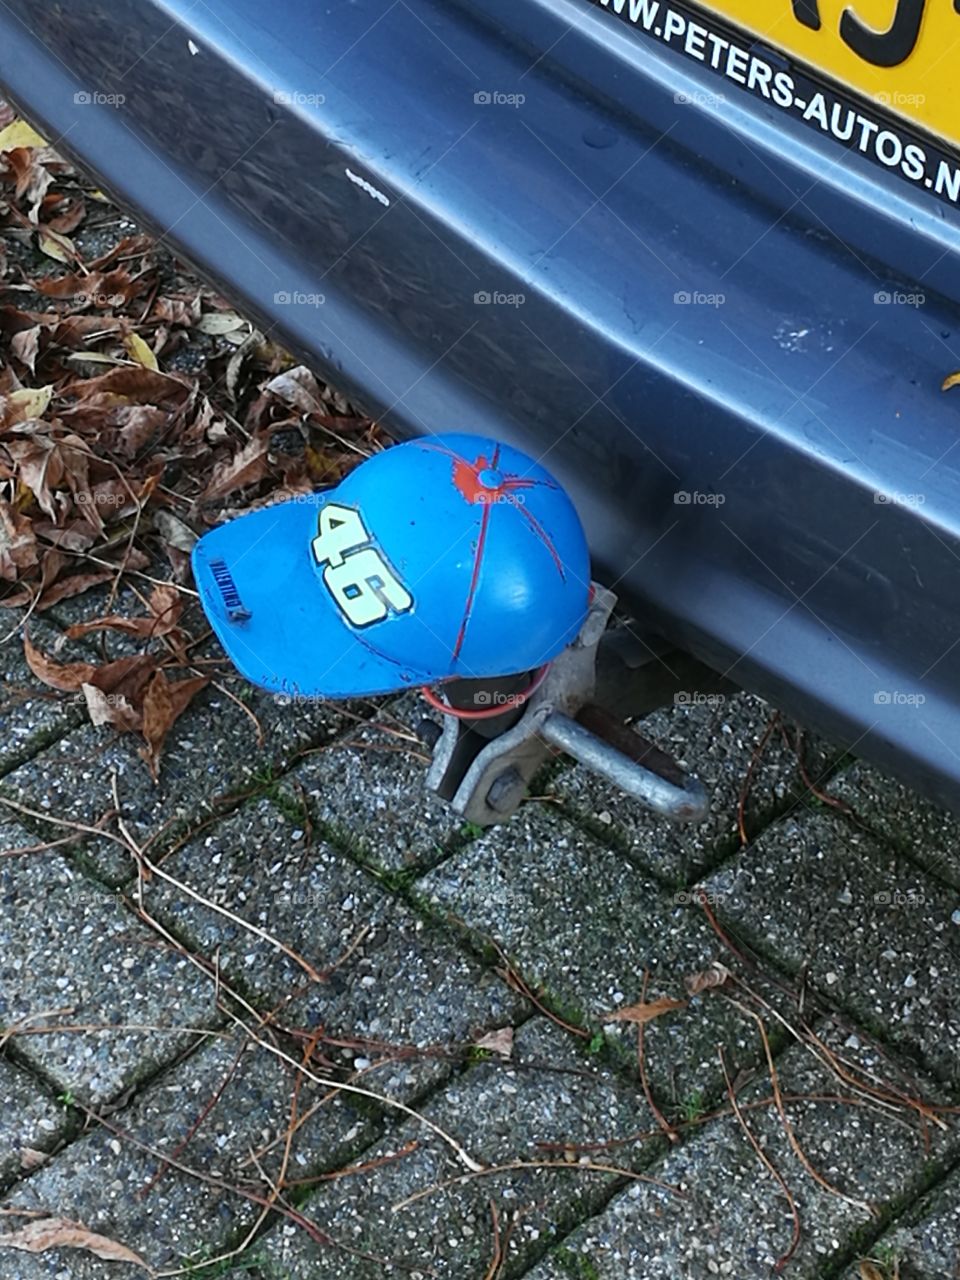 Even cars wear cool caps!